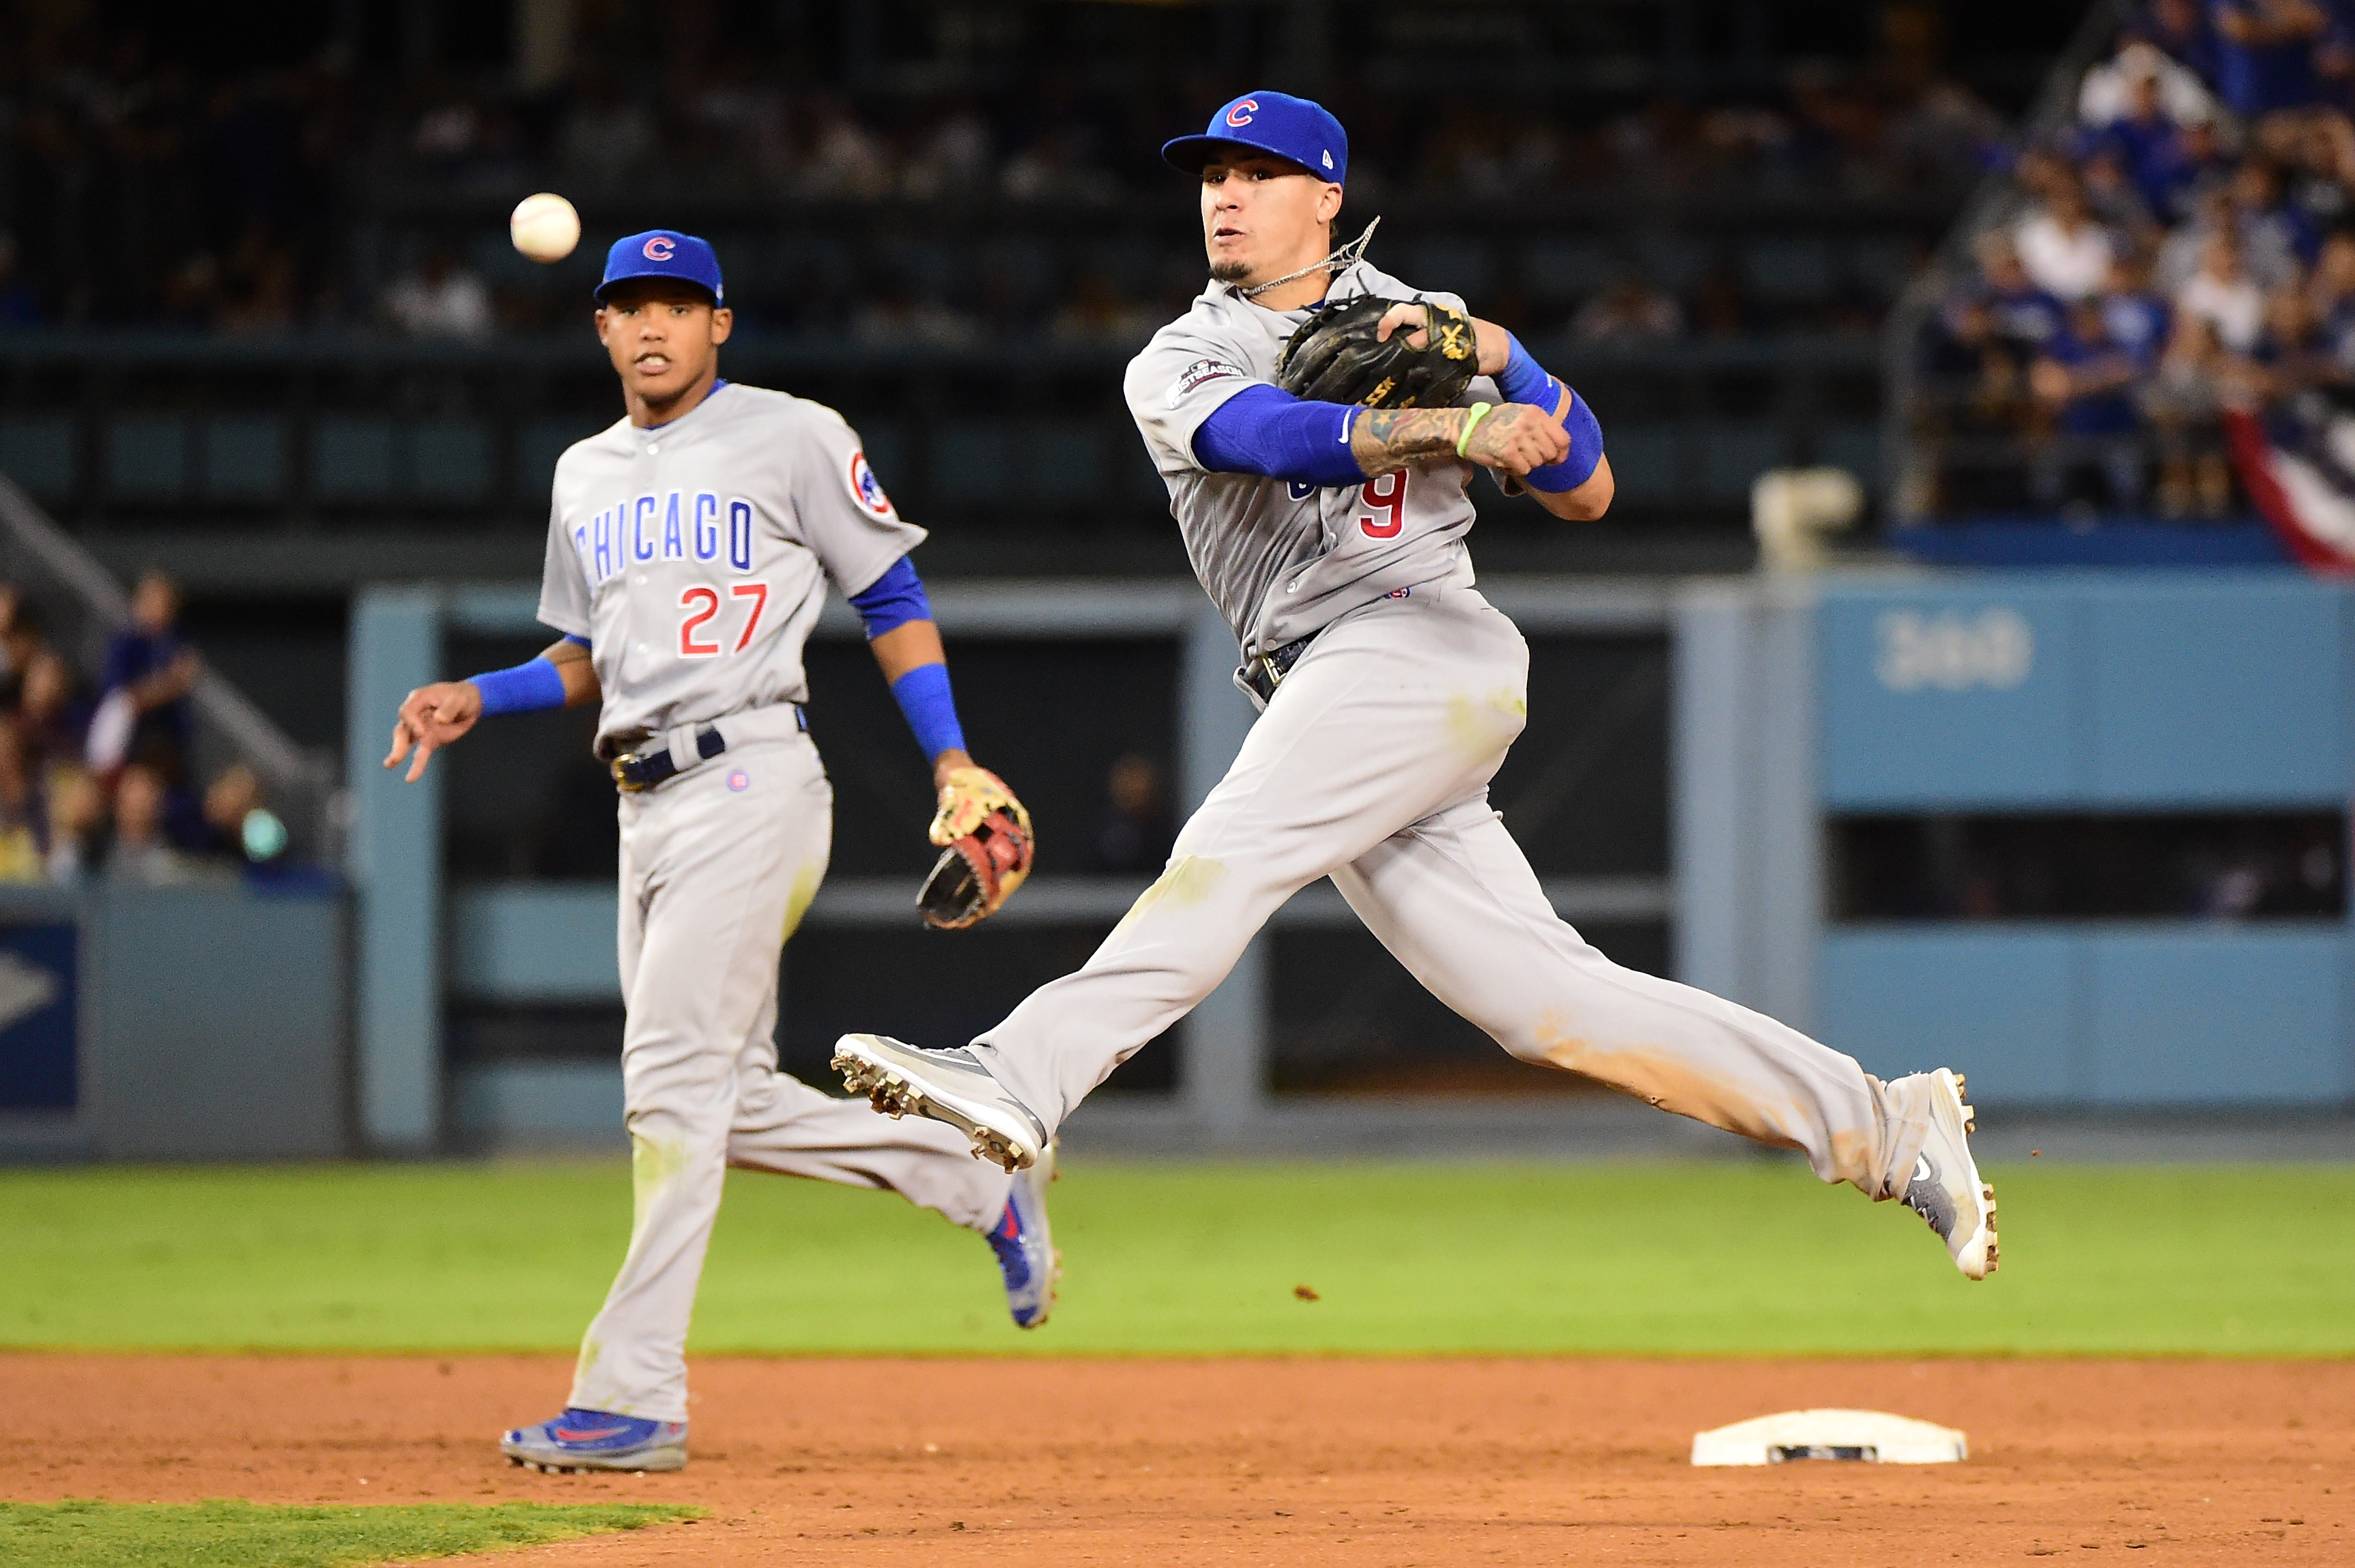 Dodgers vs. Cubs Live Stream How to Watch Game 6 Online